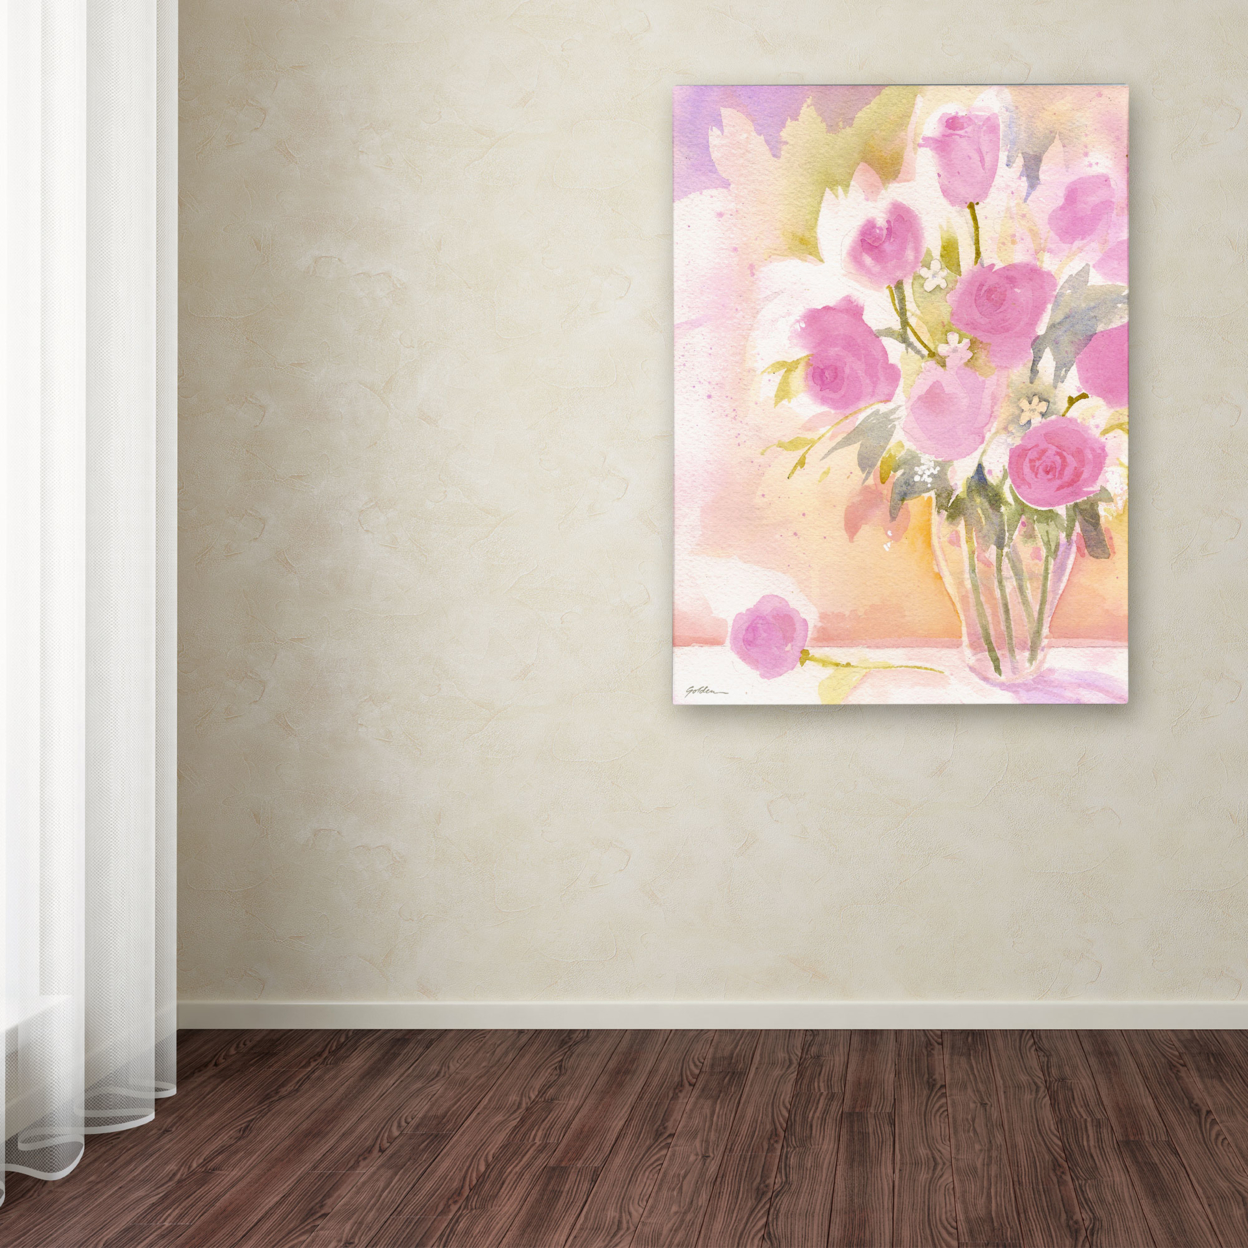 Sheila Golden 'Vase With Pink Roses' Canvas Wall Art 35 X 47